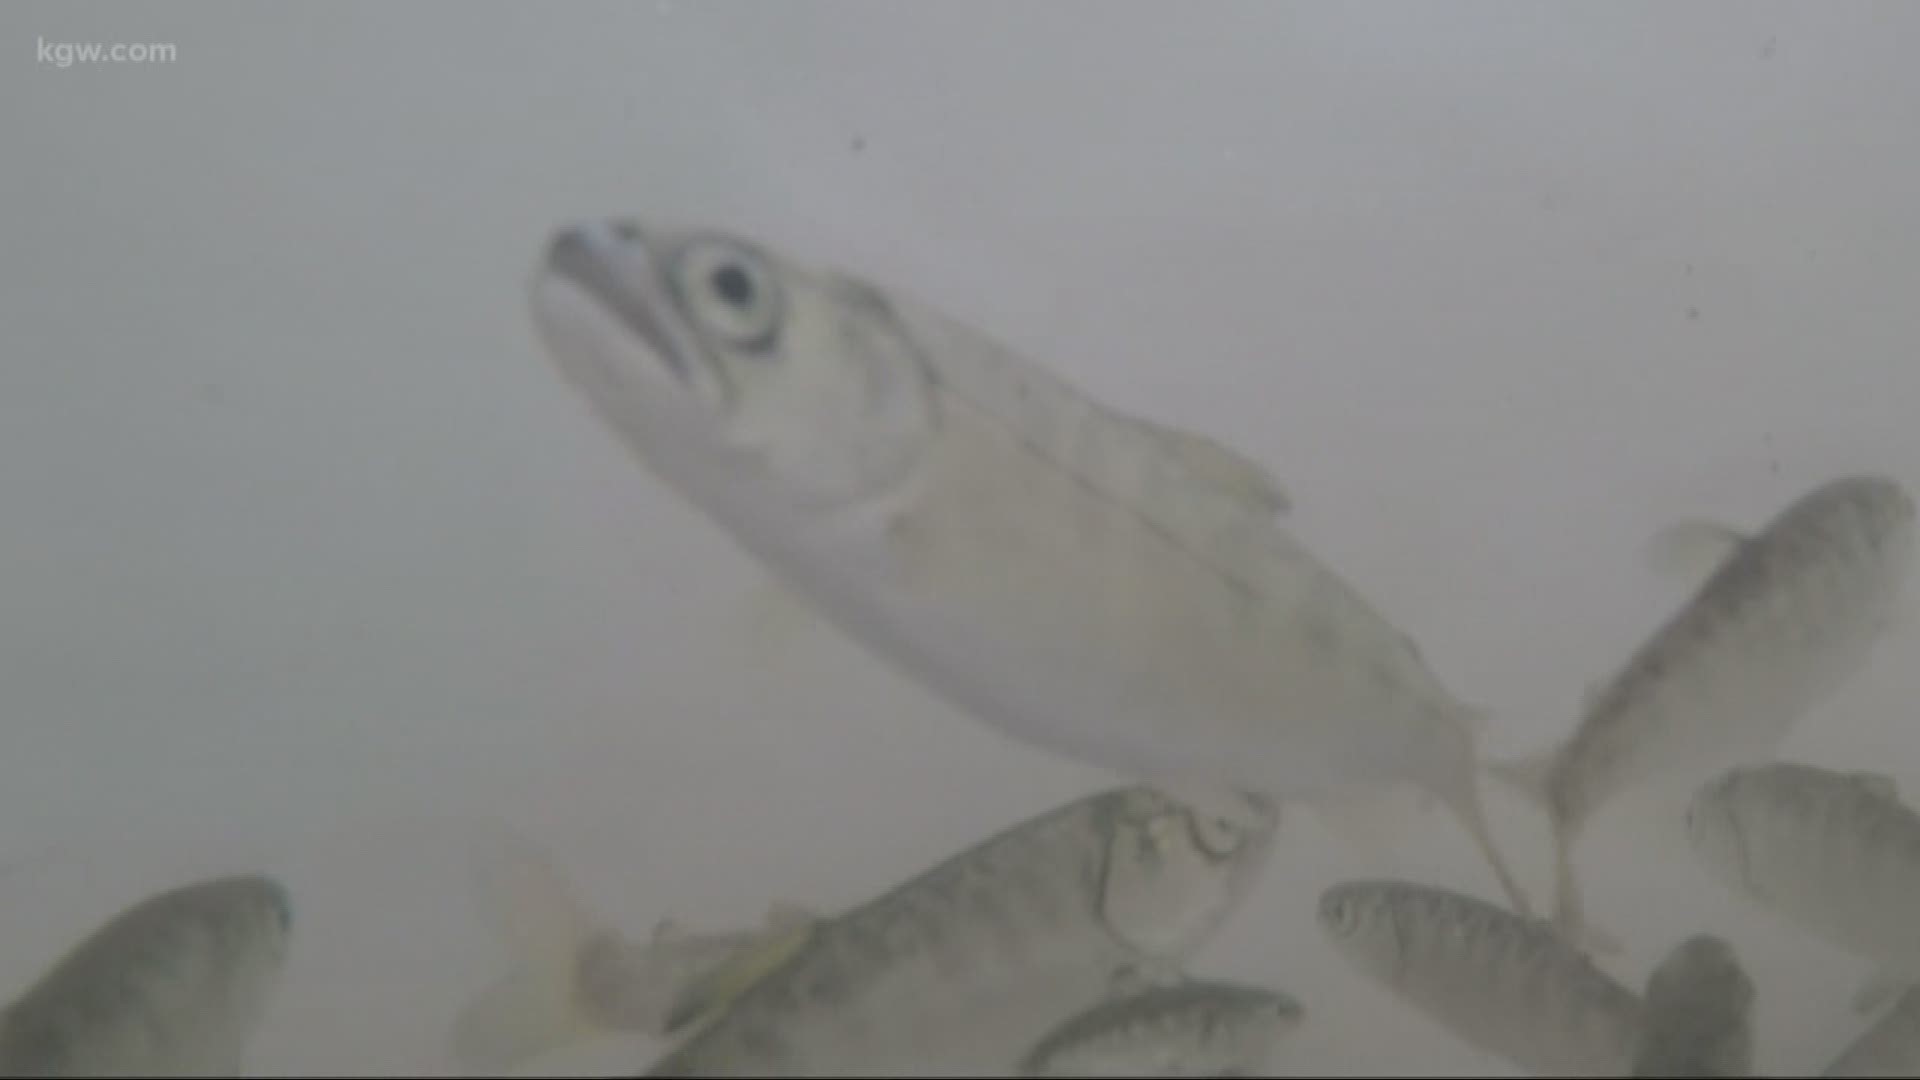 The goal is to increase the numbers of the endangered fish. It is no doubt an important effort. But some wonder if this tinkering with Mother Nature could be harming wild salmon.